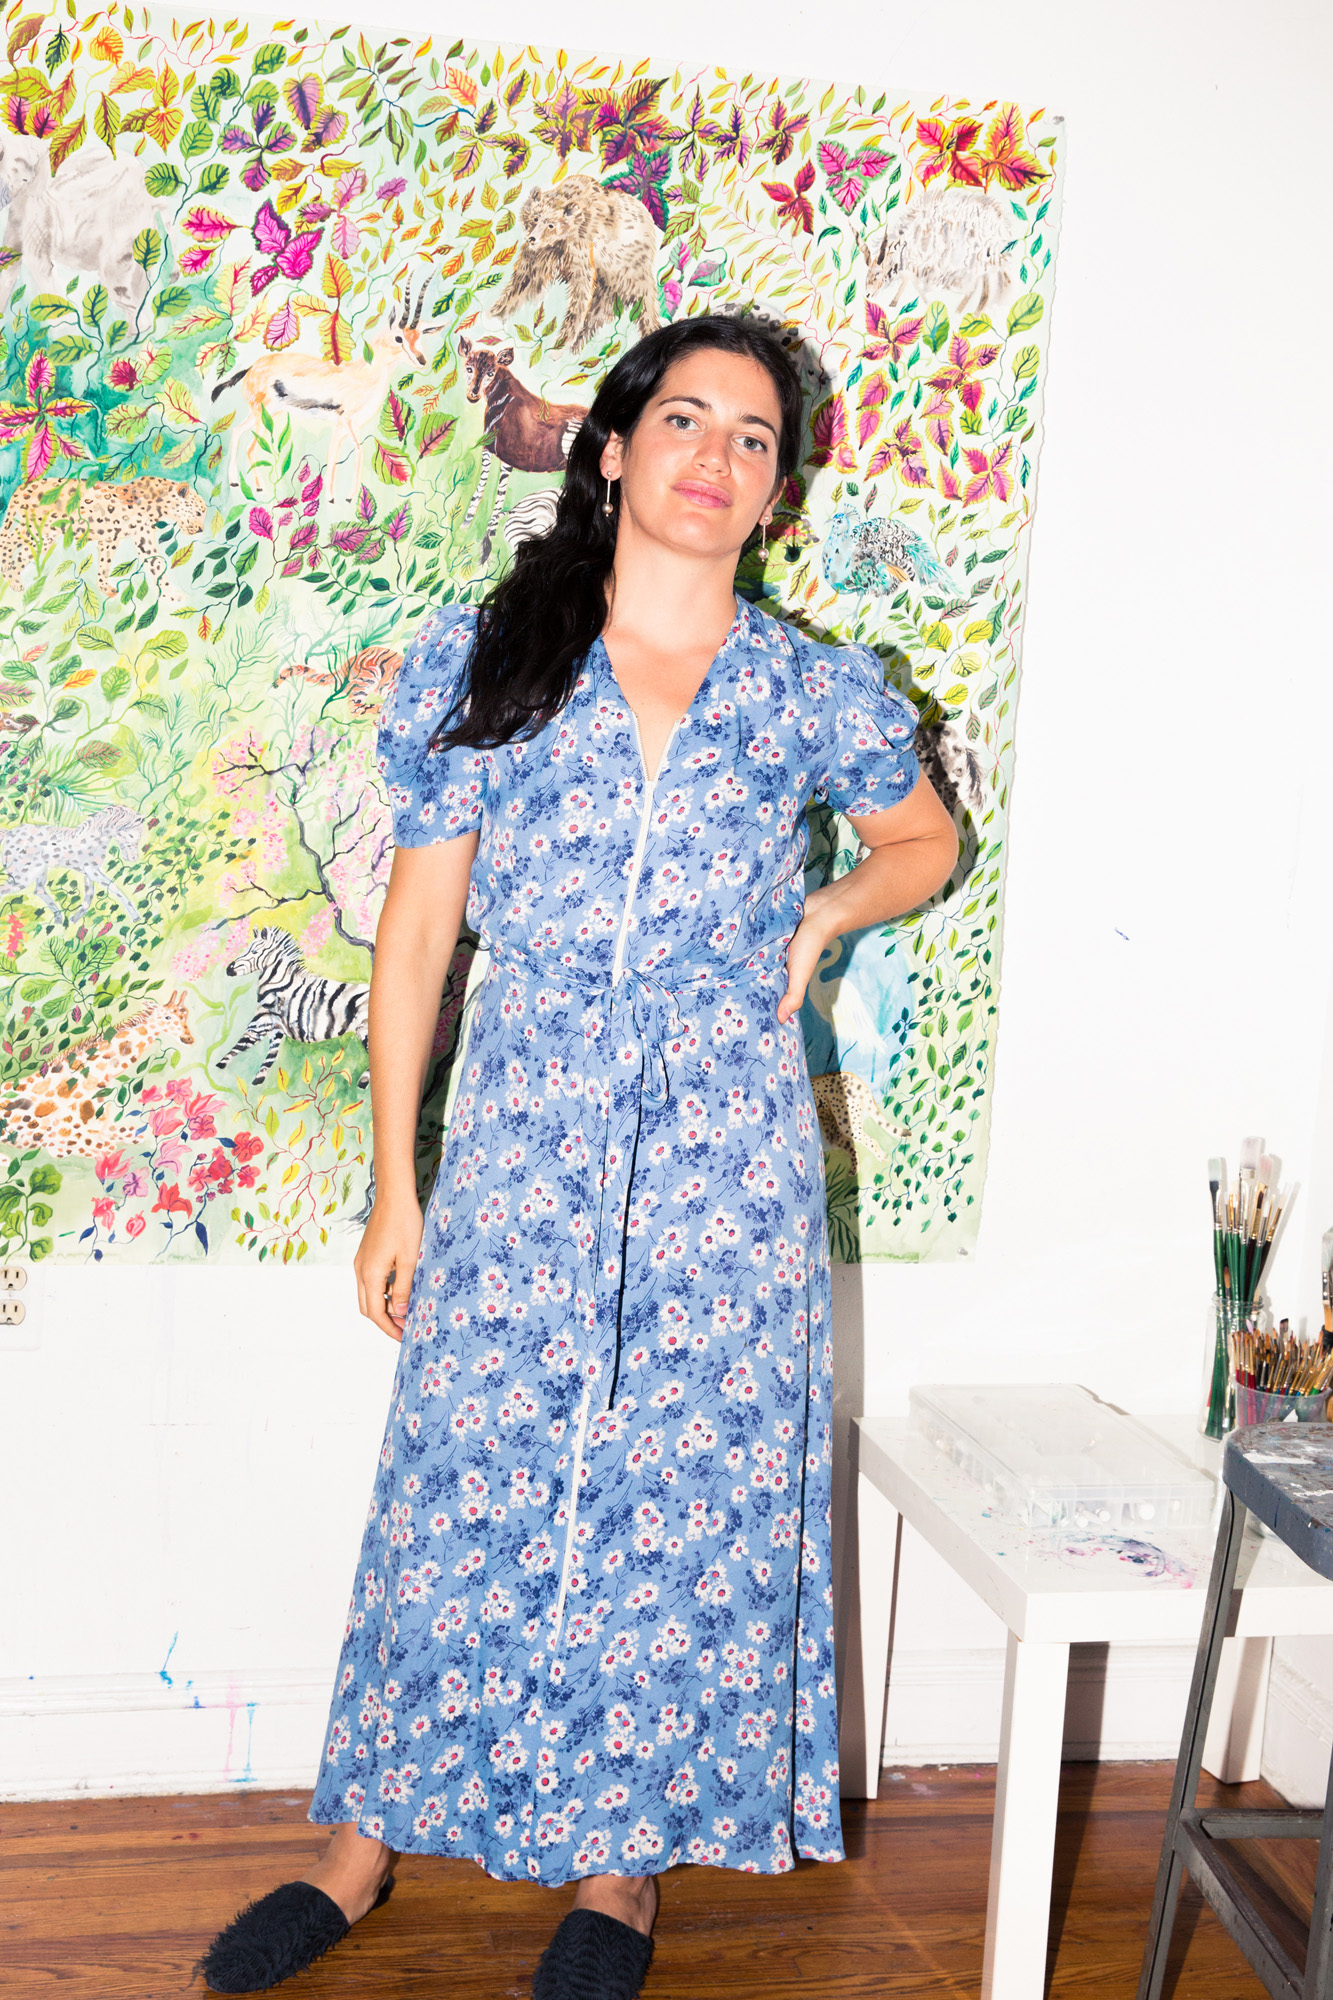 How Sisters Lilly, Zoe, and Olivia Wendel Started In Fashion - Coveteur